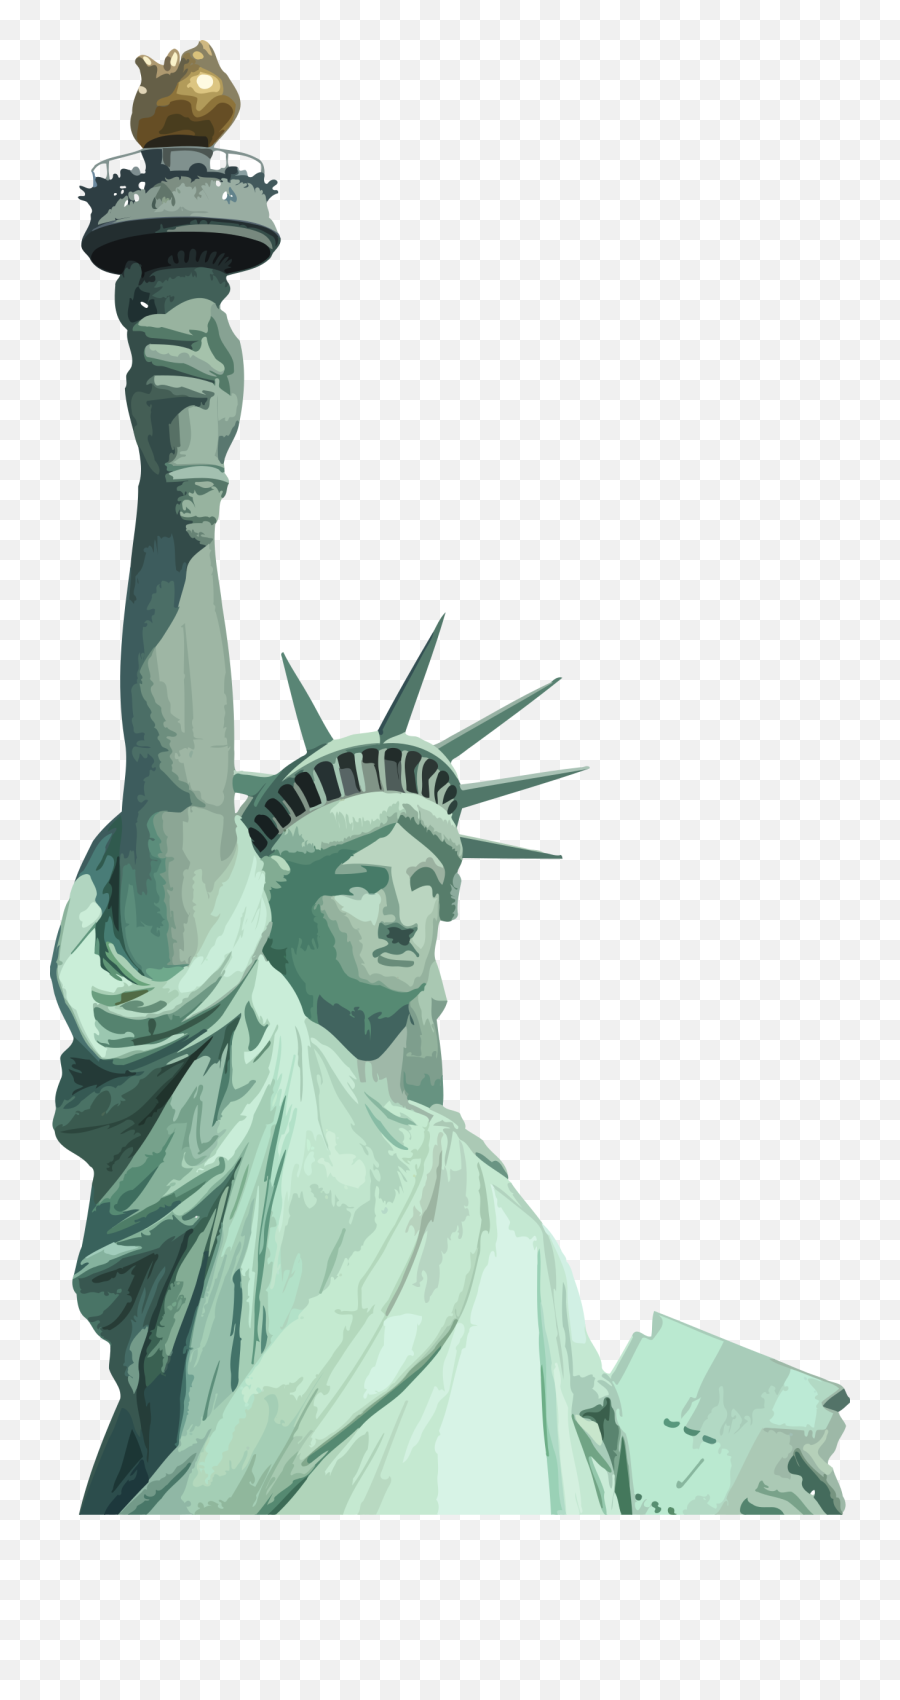 Download Statue Of Liberty Png Image - Drawing Statue Of Liberty,Statue Of Liberty Transparent